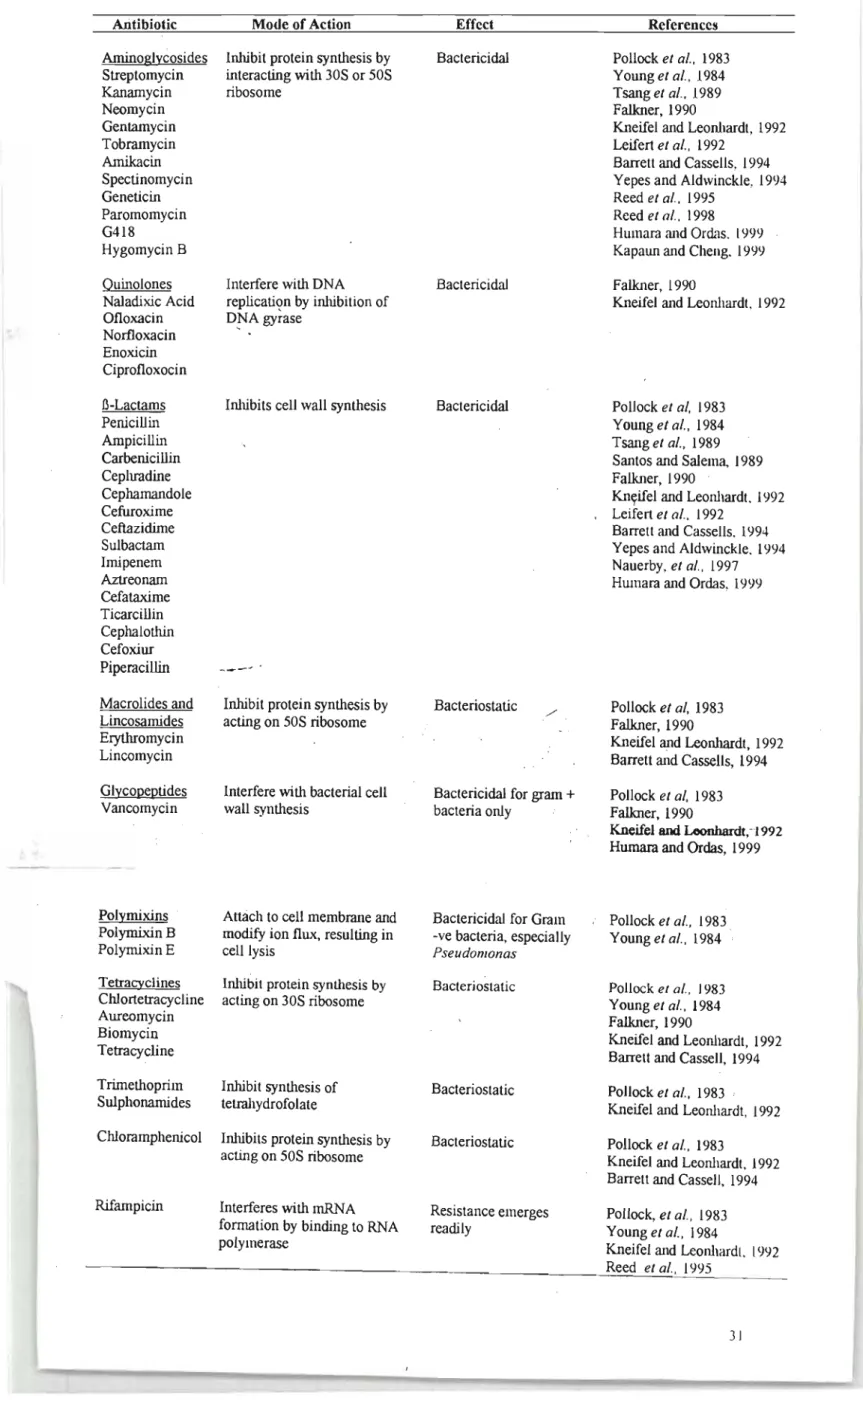 Table 2.2  Examples  of the antibiotics  used  in  plant tissue  culture  protocols,  as  a component  of growth media